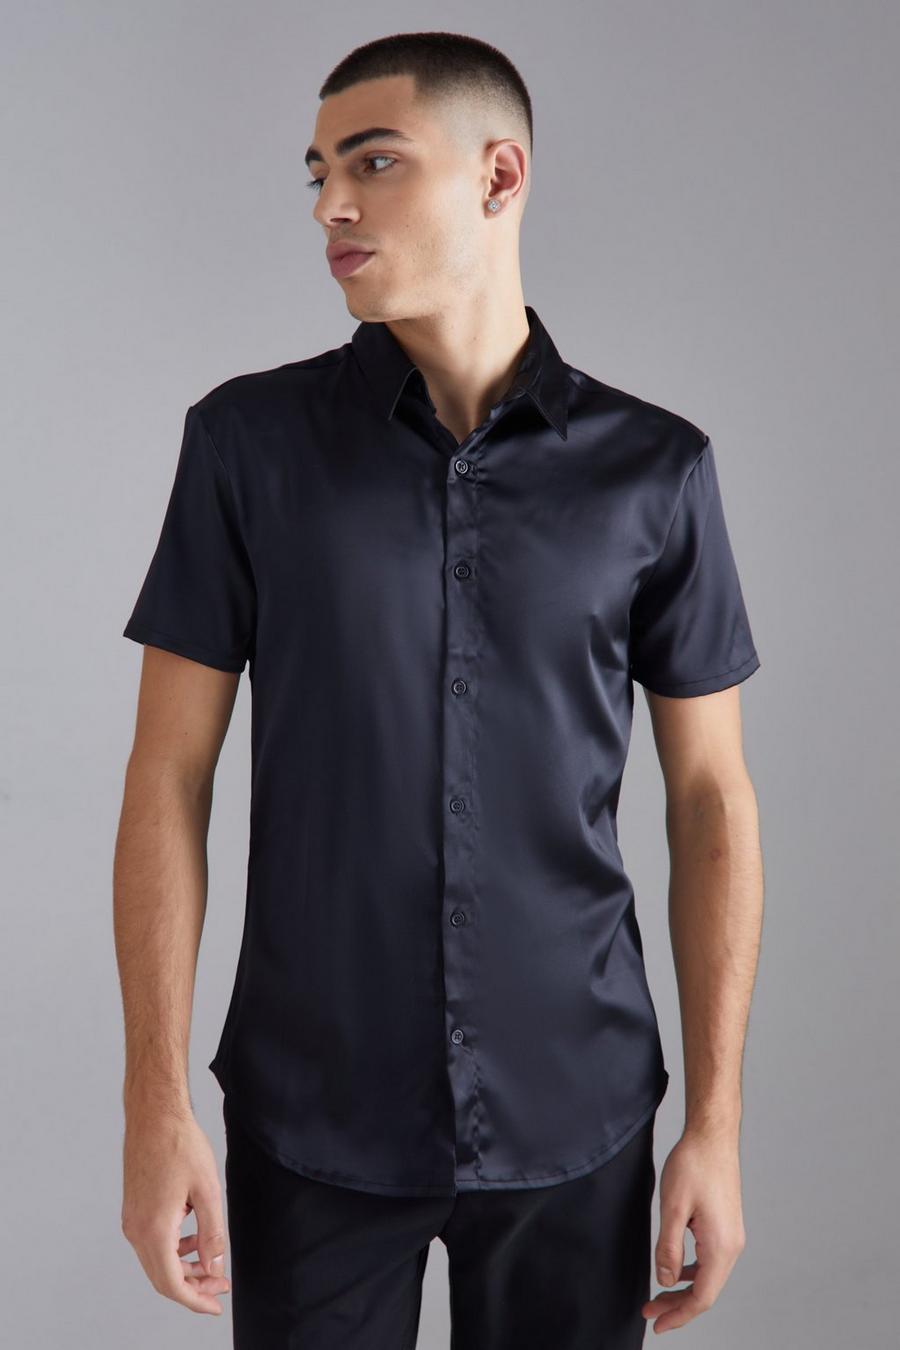 Black nero Short Sleeve Muscle Fit Stretch Satin Shirt